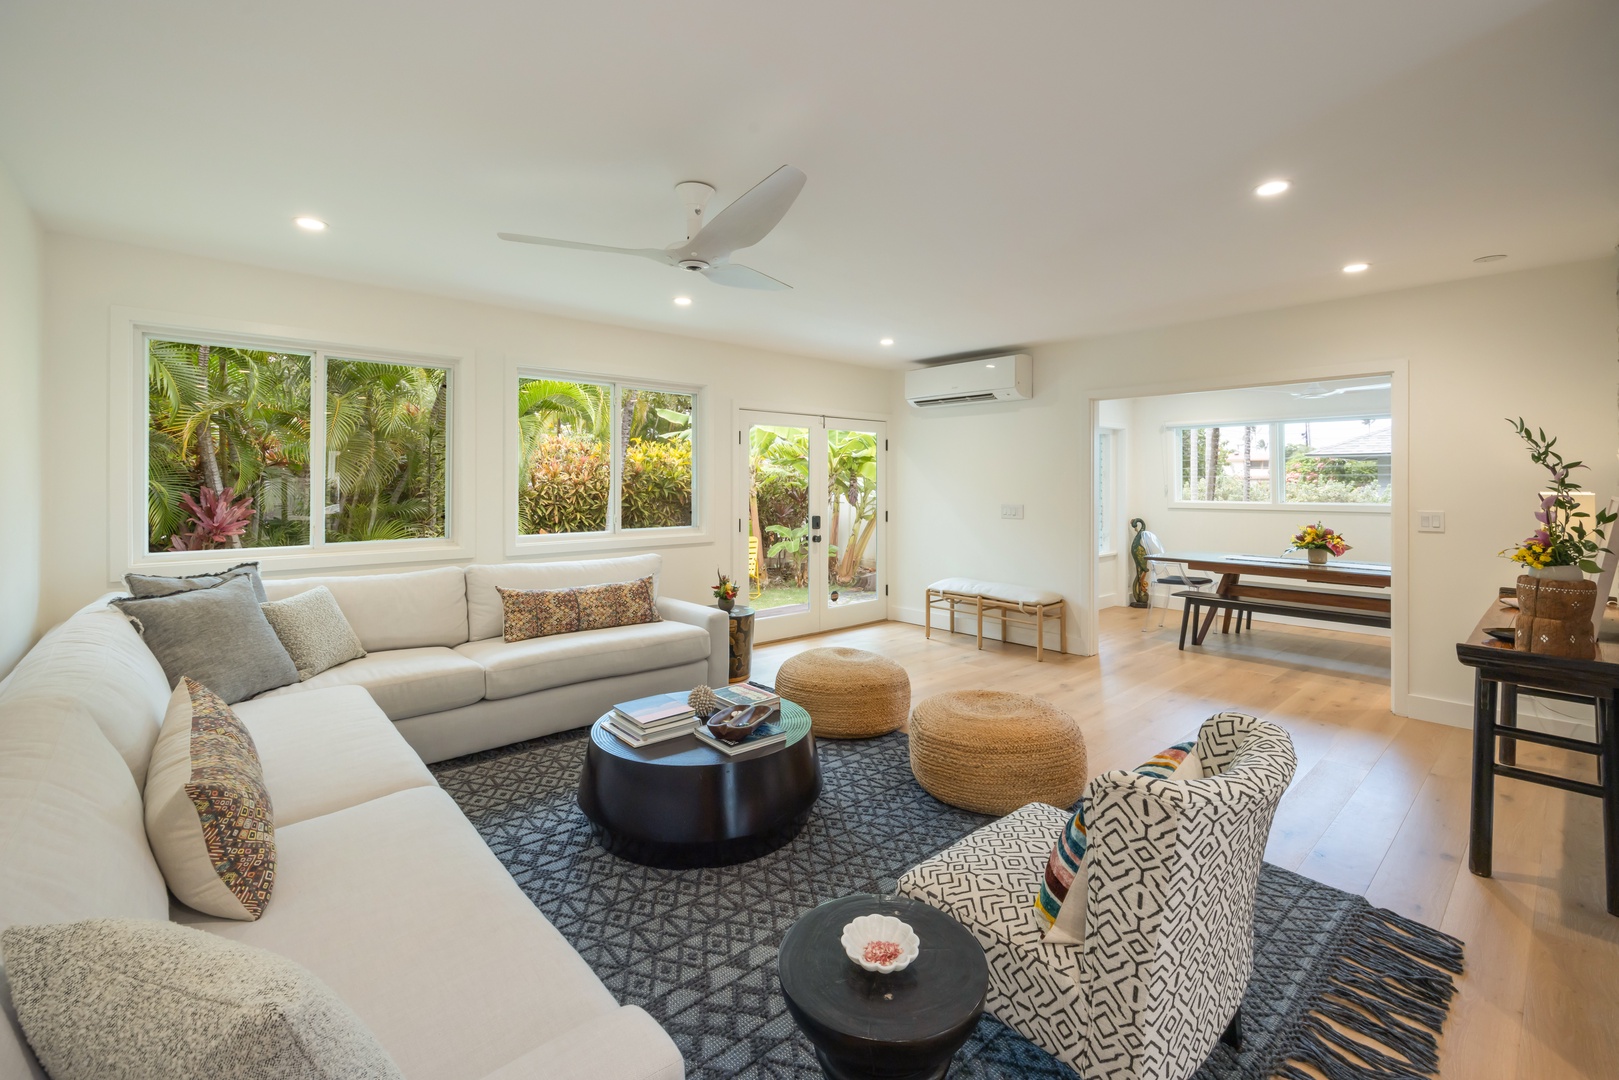 Kailua Vacation Rentals, Lanikai Ola Nani - Step into serenity with our home, where comfort and relaxation are woven into every corner.